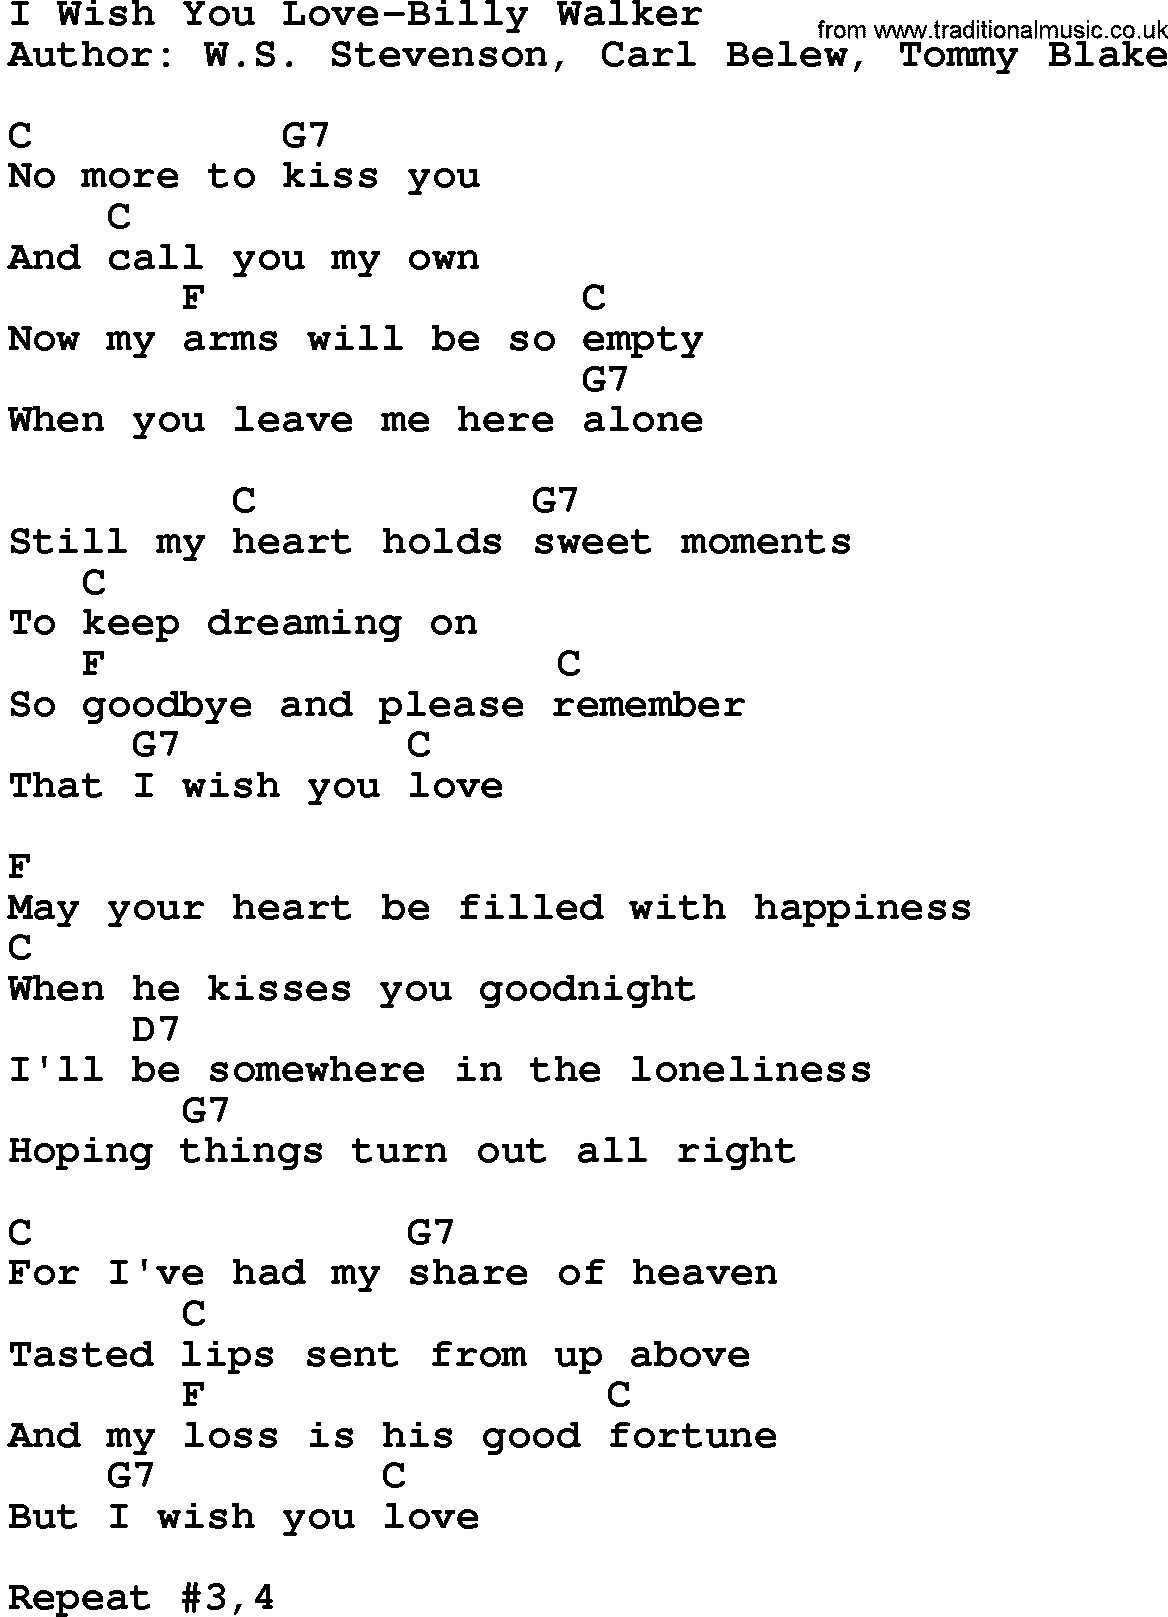 Country music song: I Wish You Love-Billy Walker lyrics and chords